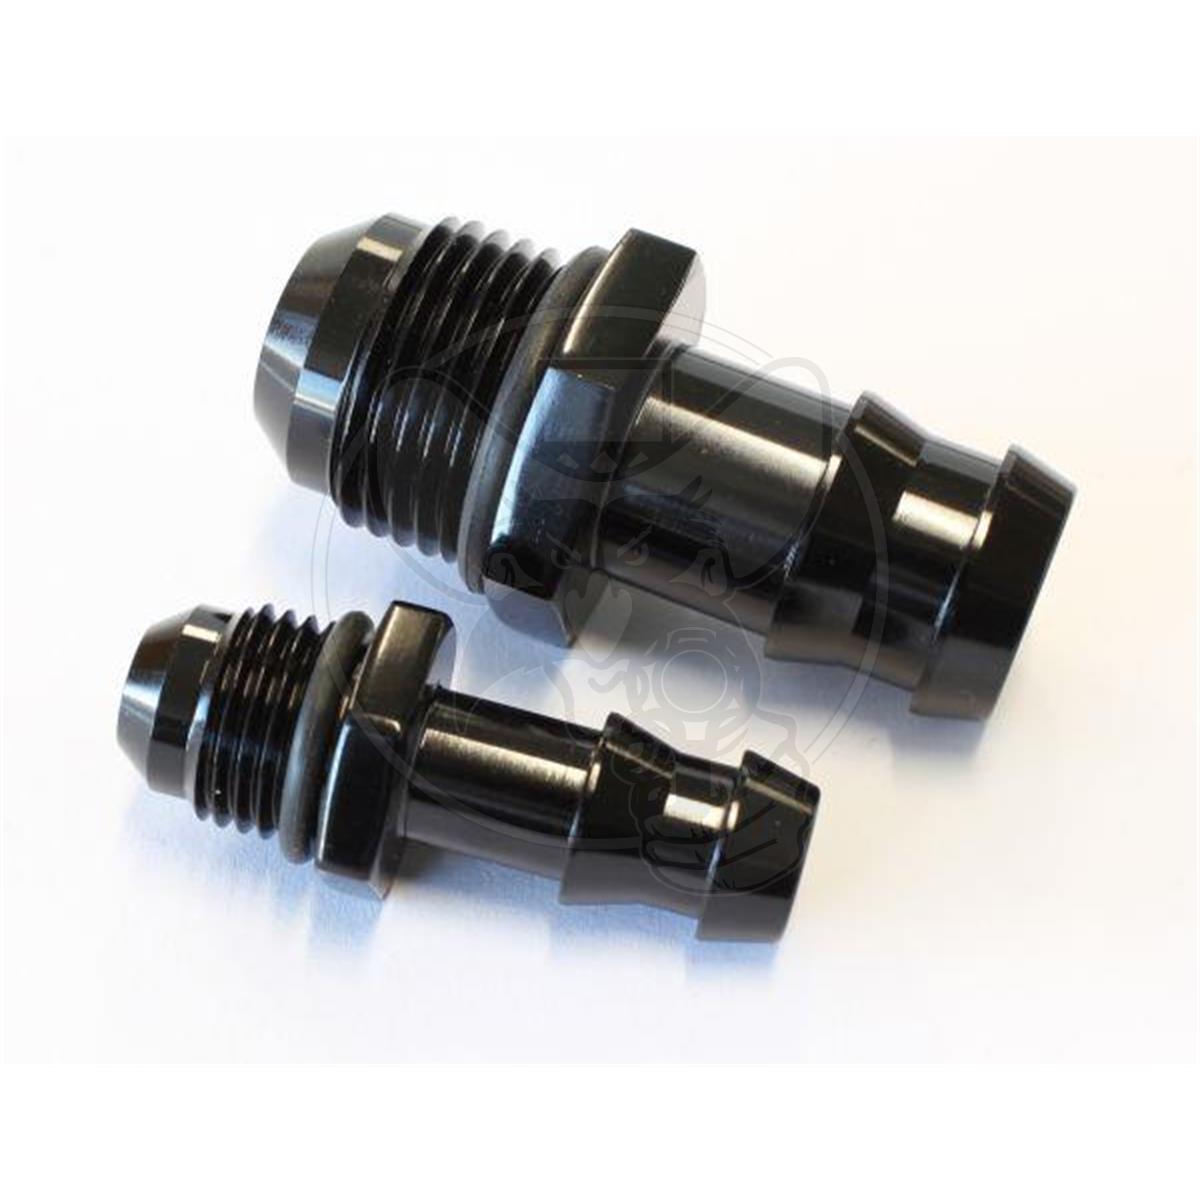 AEROFLOW REPLACEMENT FITTING KIT FOR LS PWR STEERING TANKS BLACK